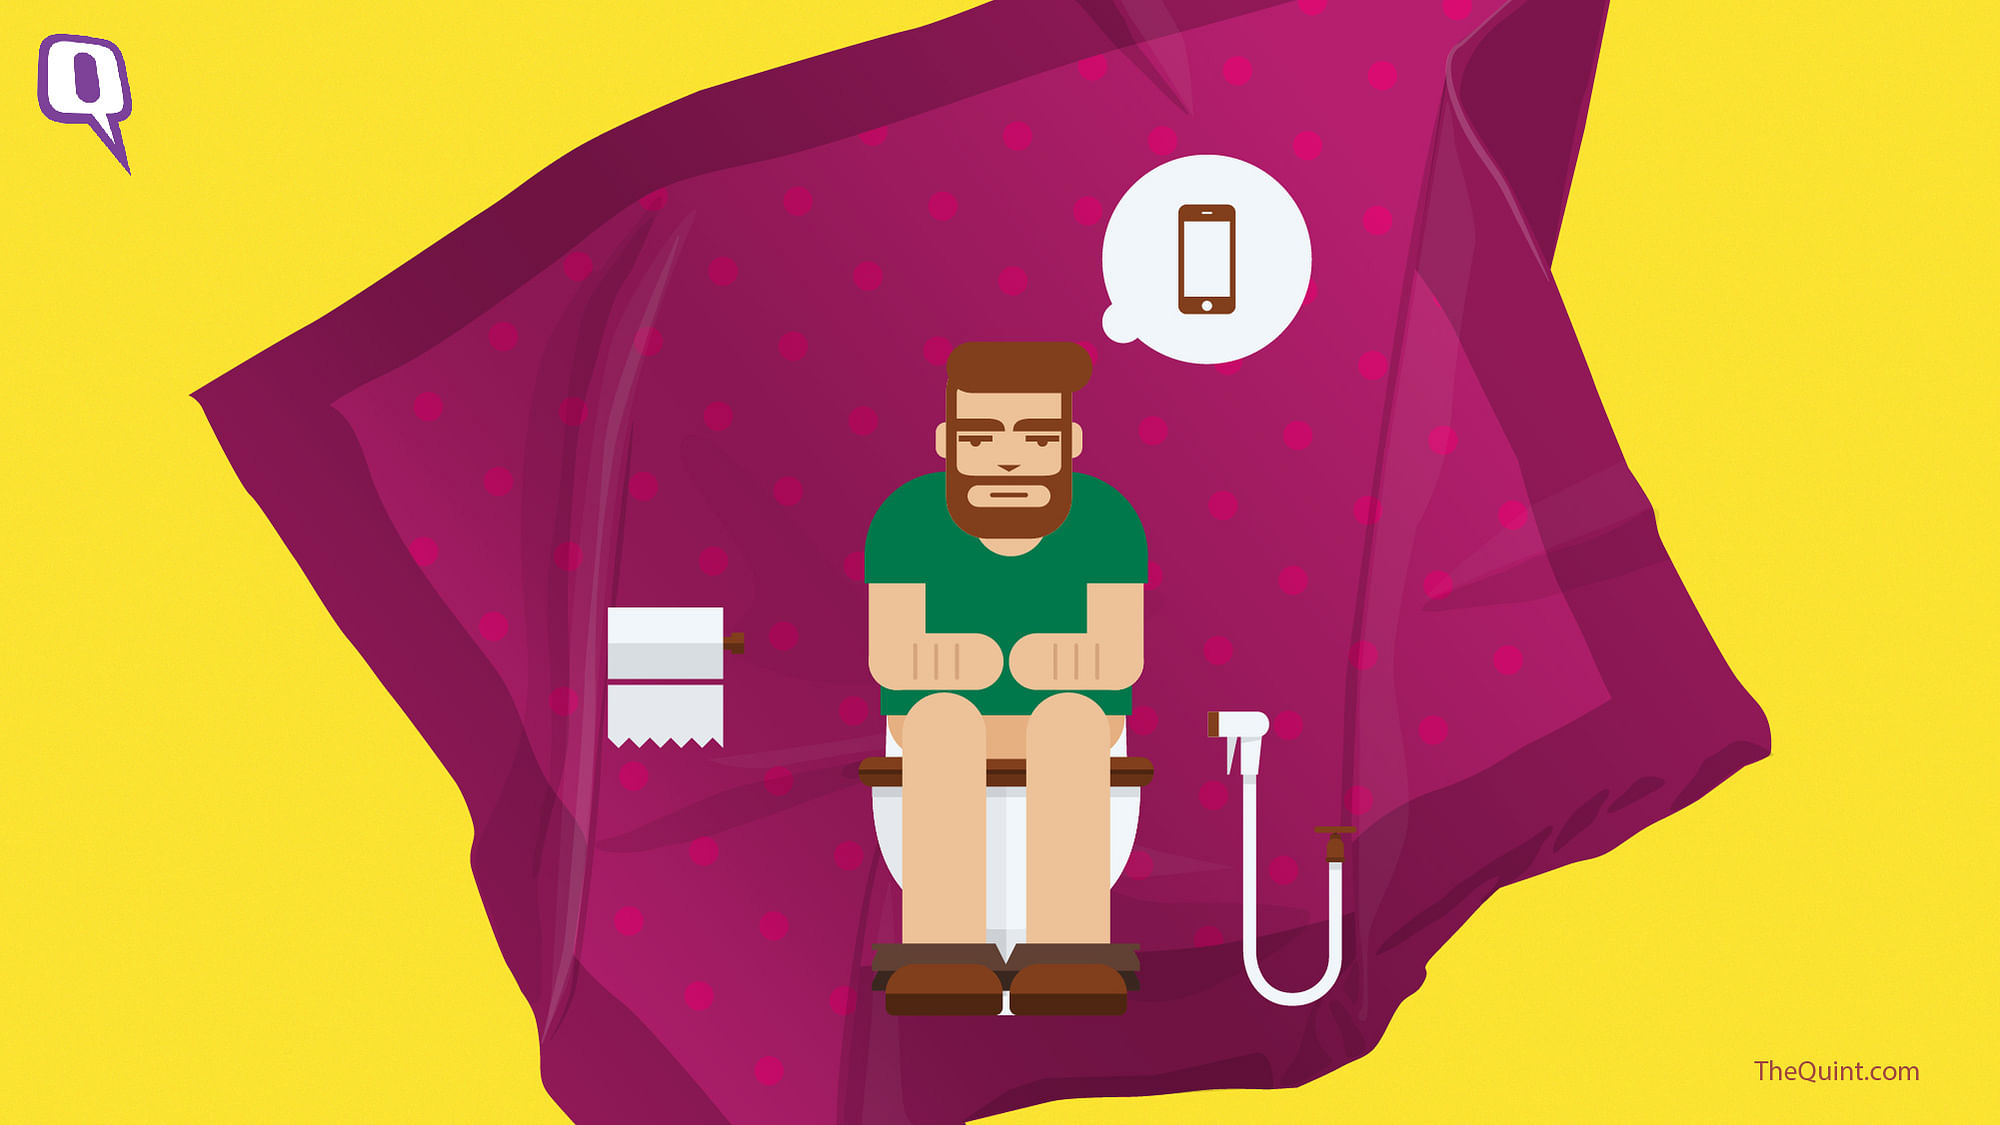 Everyday habits like taking your phone to the loo can make you sick.&nbsp;